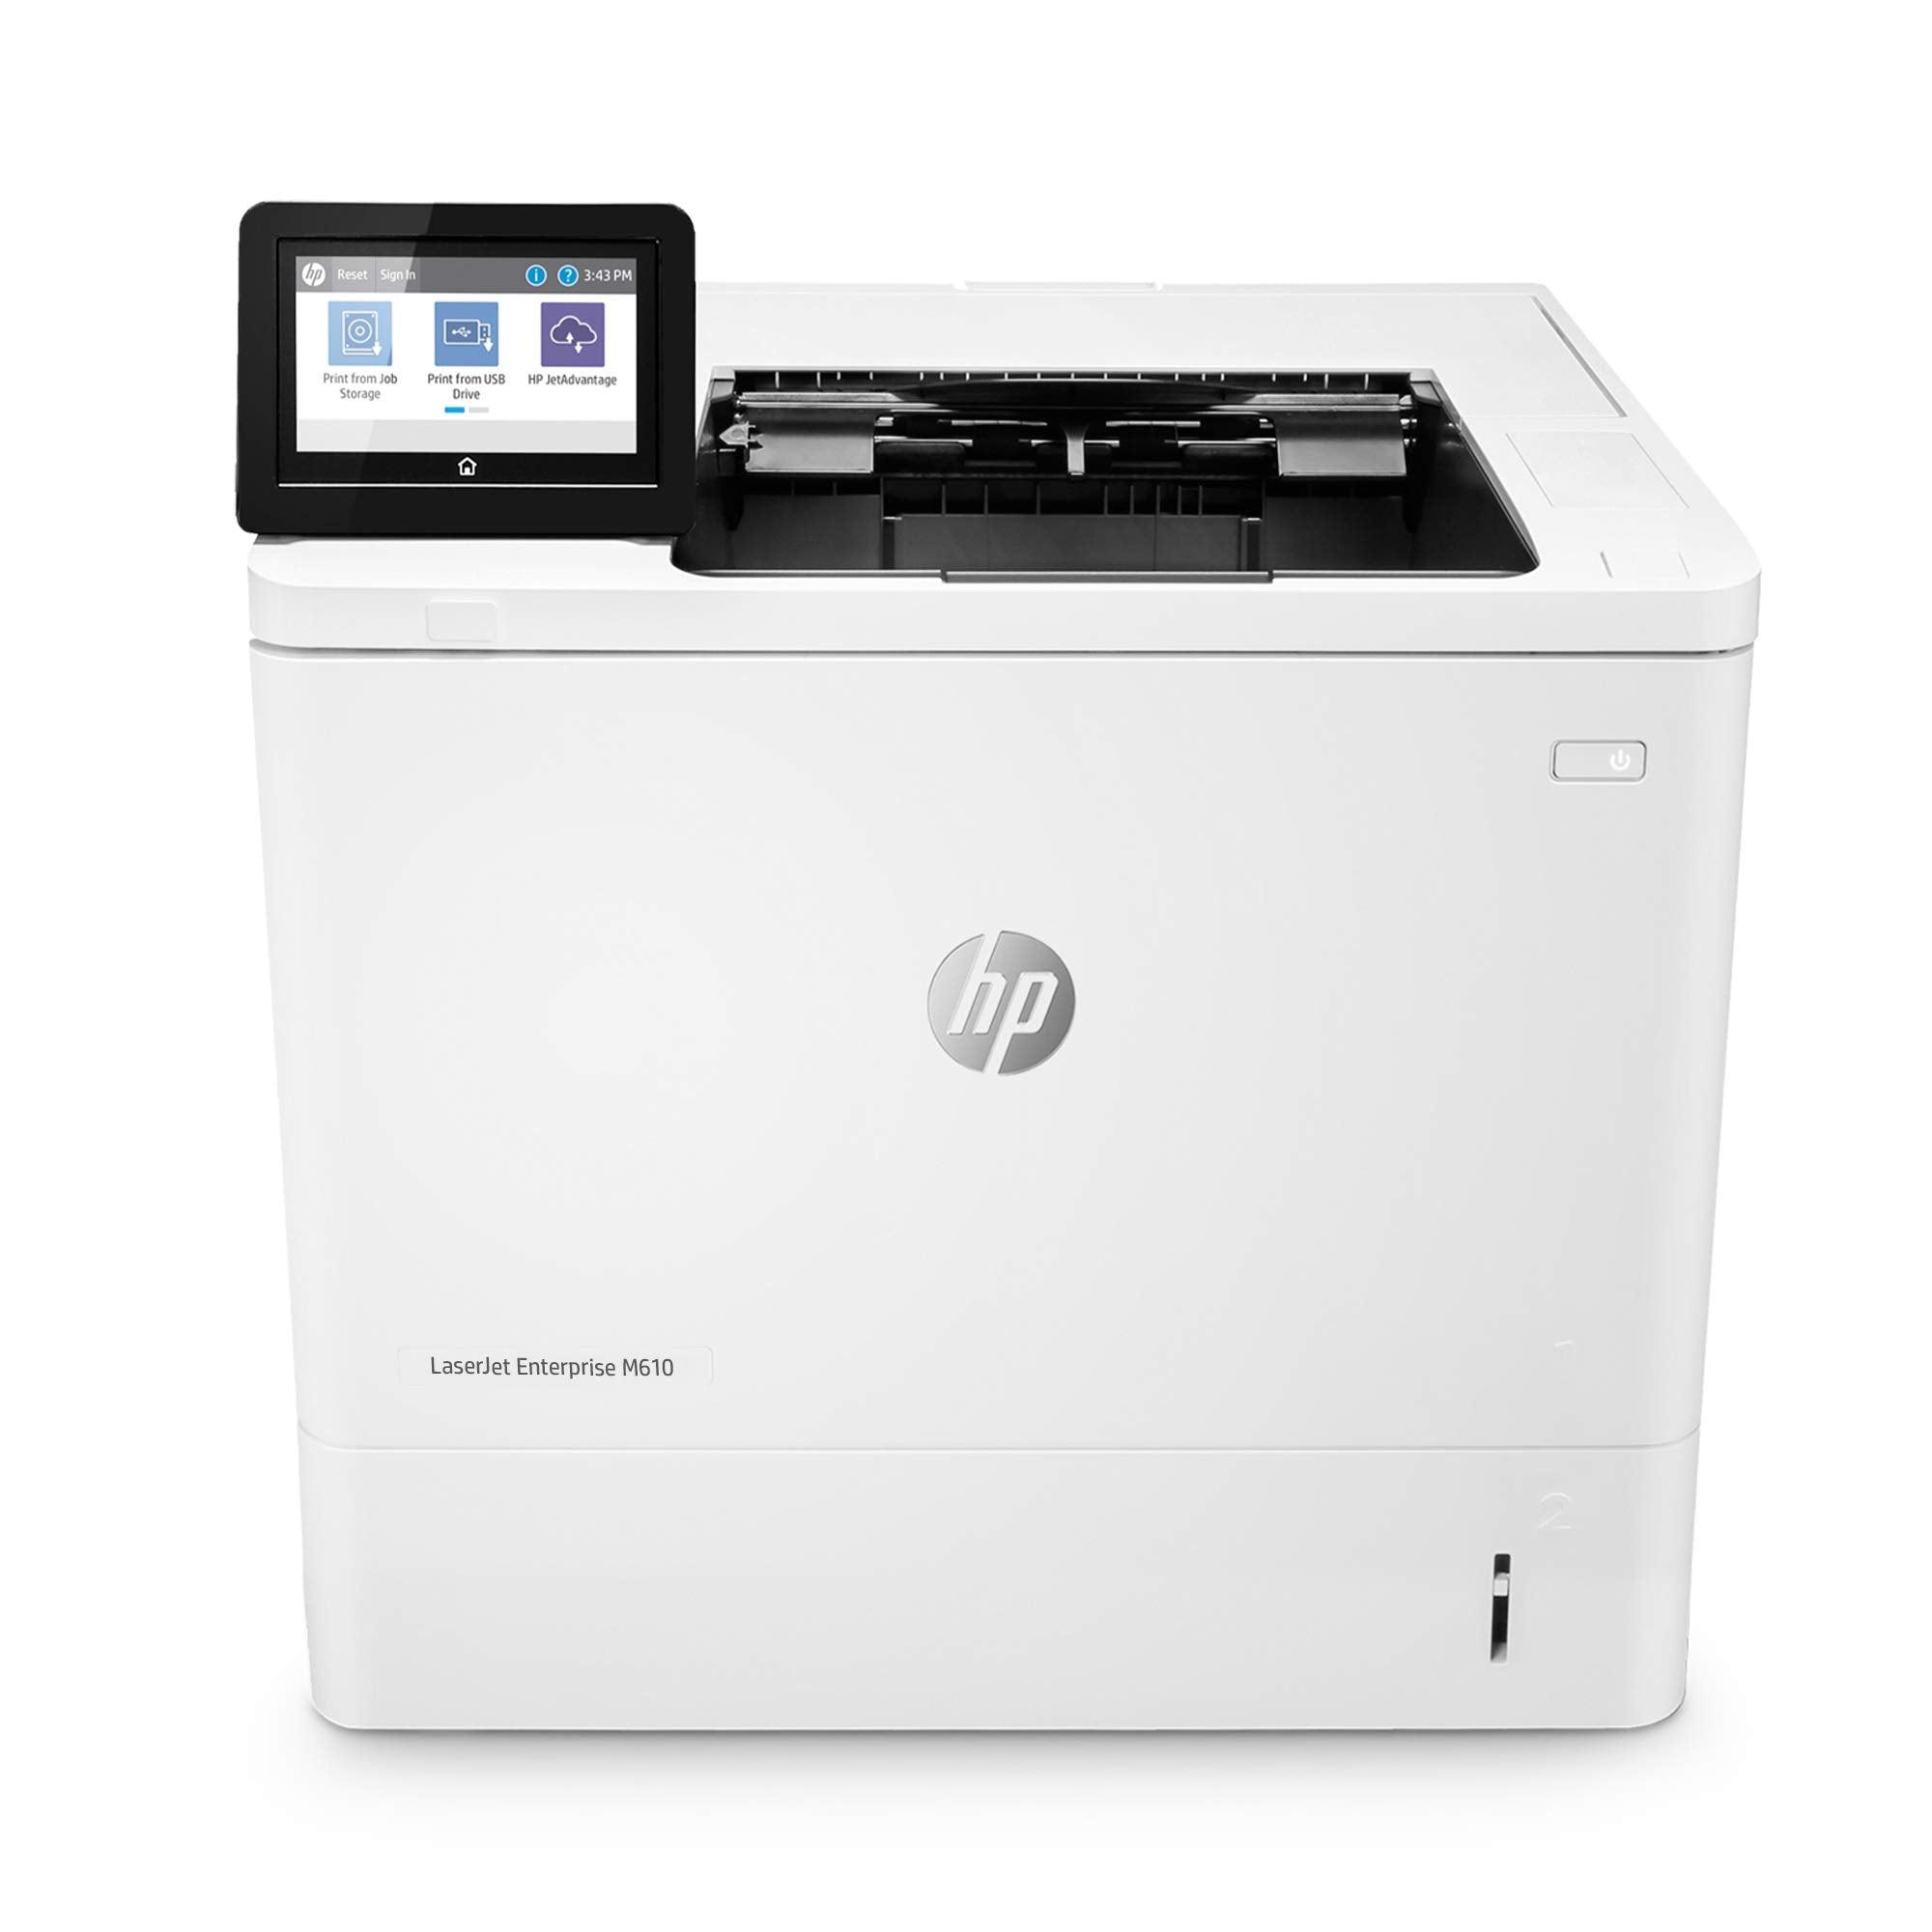 HP LaserJet Enterprise M610dn Monochrome Printer with built-in Ethernet & 2-sided printing (7PS82A)